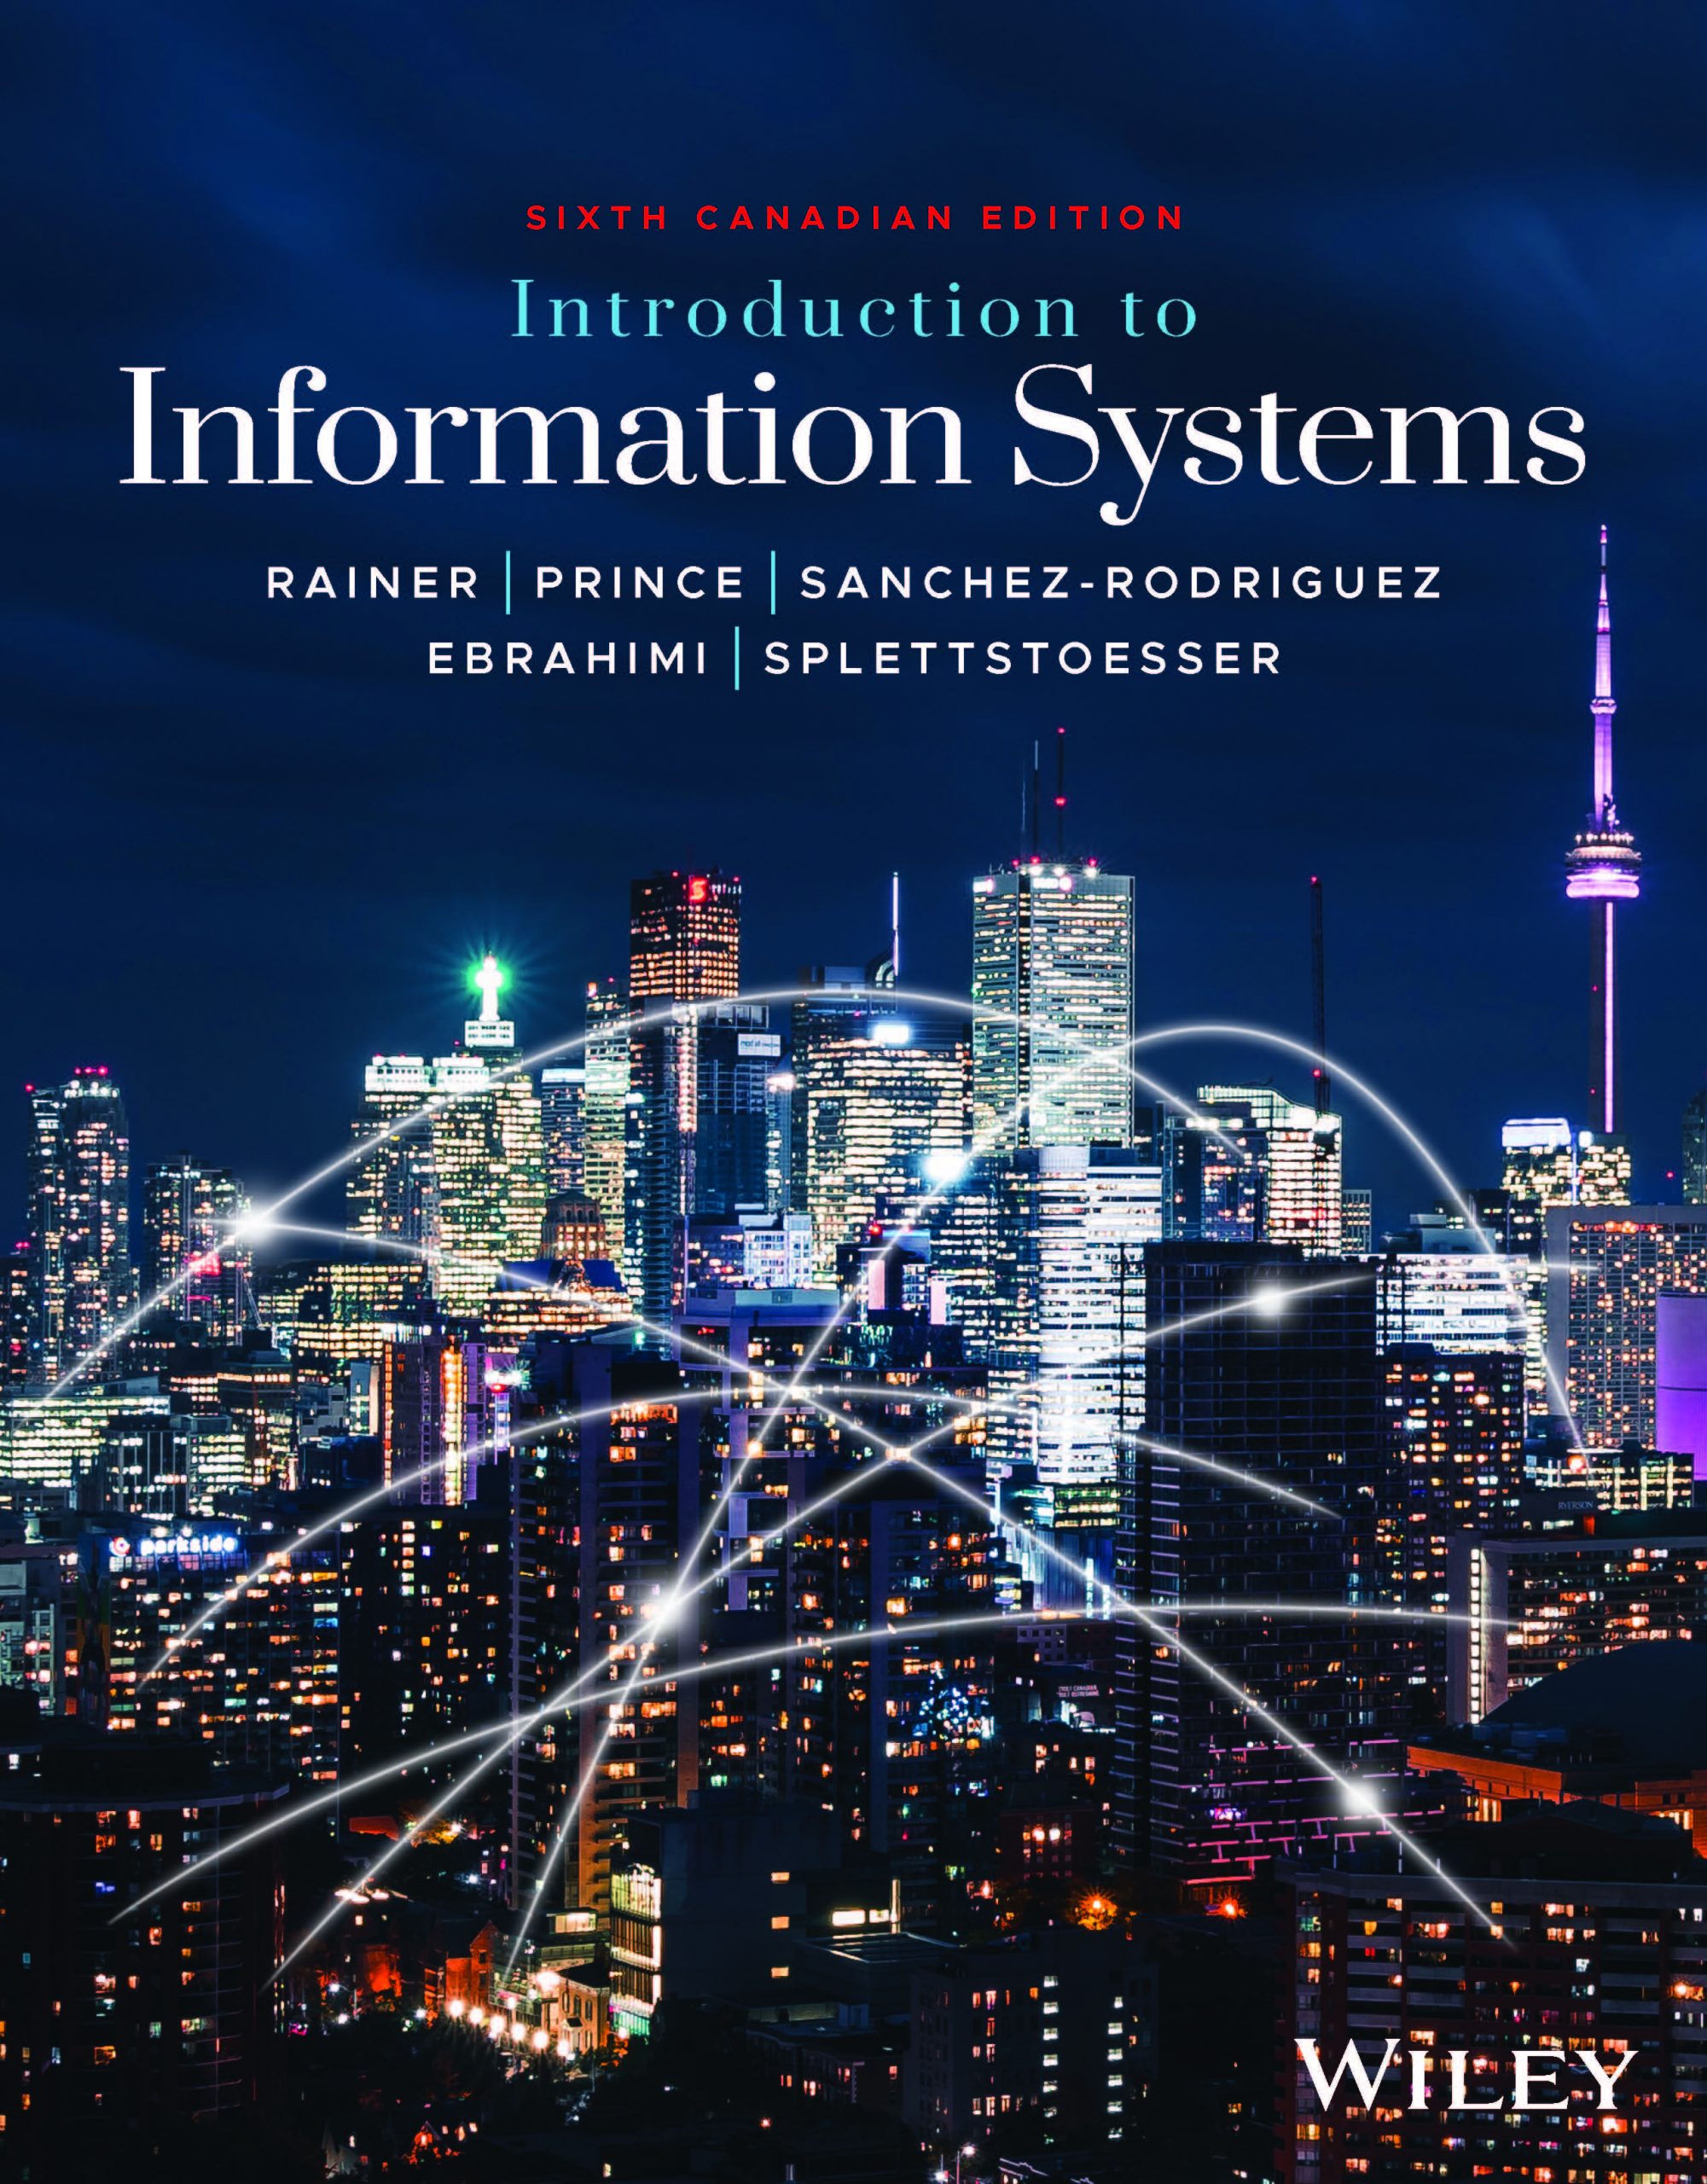 Introduction to Information Systems, 6th Canadian Edition Book Cover